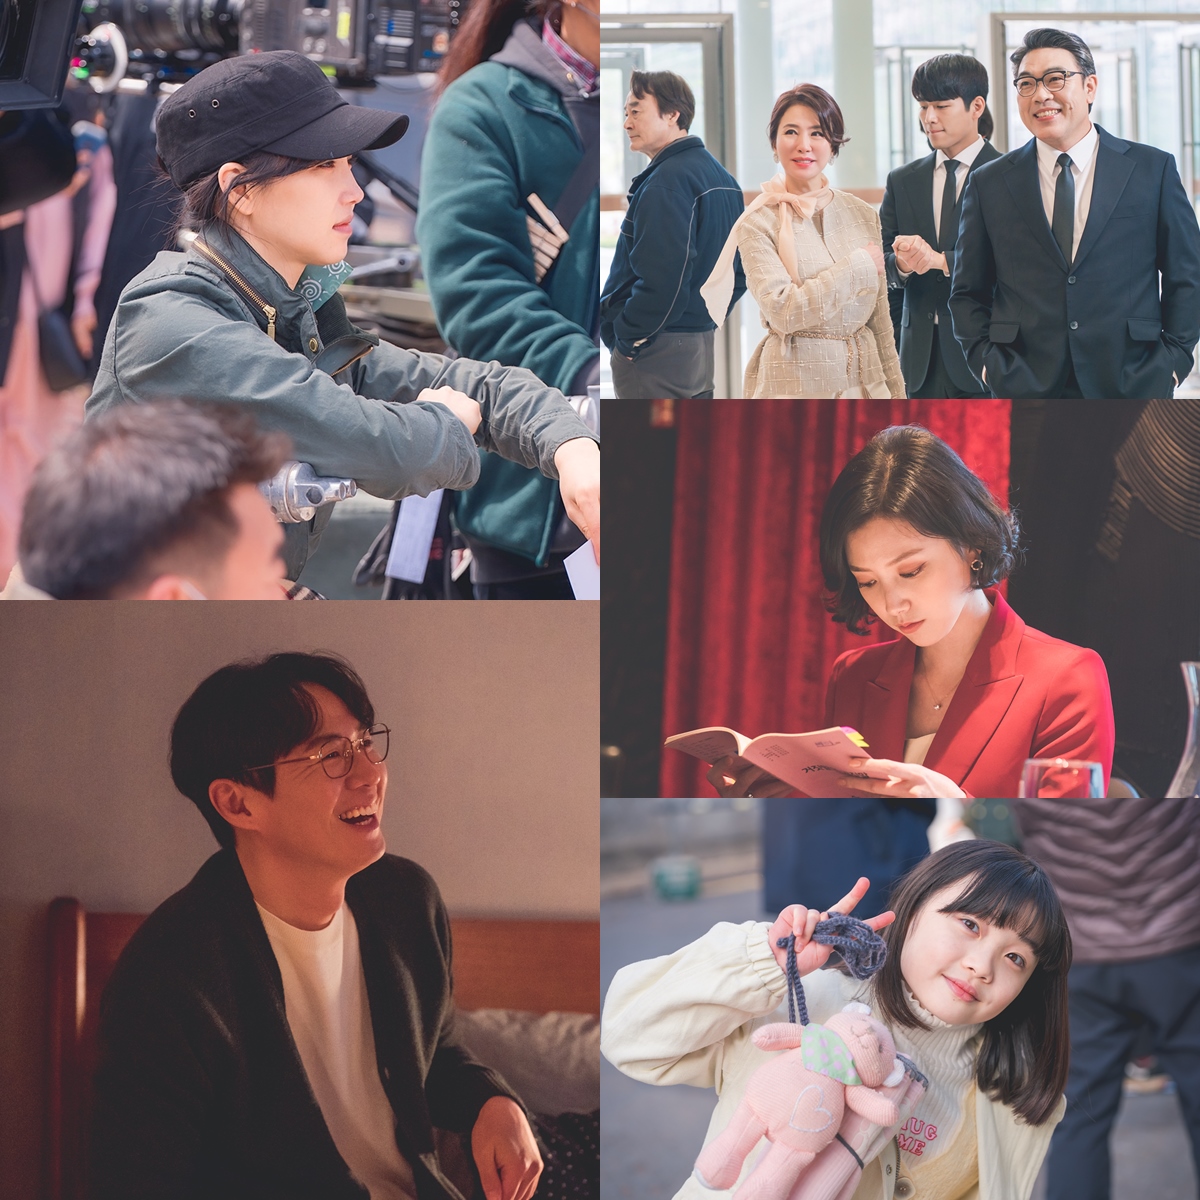 While Lie of Lies is getting a hot response with a breathtaking development, the tireless energy of the leading actors is shining.Channel A Gimtar Jacksons Lie is a behind-the-scenes cut featuring actors such as Lee Yoo-ri (played by Ji Eun-su), Yeon Jung-hoon (Kang Ji-Min), Lee Il-hwa (Kim Ho-ran), Lim Ju-eun (silver Semi), and Ko Na-hee (Gangwooju). Hes out.In the last broadcast, a story was told about Ji Eun-soo (Lee Yoo-ri), who had been in prison for 10 years on suspicion of murdering Husband, struggling to meet her biological daughter, who had separated after being released from prison.Lie of Lie captivated the house theater with its unique Kahaani, sensual visual beauty, and tight performances by the main actors, imprinting an intense presence at the same time as the broadcast began.In the meantime, the behind-the-scenes cuts of actors who have created many scenes in just four times with amazing acting power and character expression are revealed and attention is focused.Lee Yoo-ri in the photo shows that he concentrates on every moment with a serious attitude and completely melts into the station.On the other hand, Yeon Jung-hoon of Kang Ji-Min station brightens the surroundings with warm Smile and makes you feel the pleasant scene atmosphere.In addition, Lee Il-hwas soft Smile, which made viewers nervous with sharp charisma, and Lim Ju-eun, who is trying to create a more perfect scene by checking the script, can be seen in the synergy of luxury actors who create professional and comfortable airflow.Here, Actor Ko Na-hees fresh Smile is caught together, making the viewers laugh.As such, Actors who believe and see are energizing the atmosphere of the filming scene with their energetic energy and serious attitude toward acting.The expectation of the house theater is also growing in the more chewy and tense development that those who are not tired even outside the screen will show.The unpredictable Kahaani, which gives crazy immersion, is broadcast every Friday and Saturday at 10:50 pm and can be seen at the OTT platform wave.Photo = Channel A